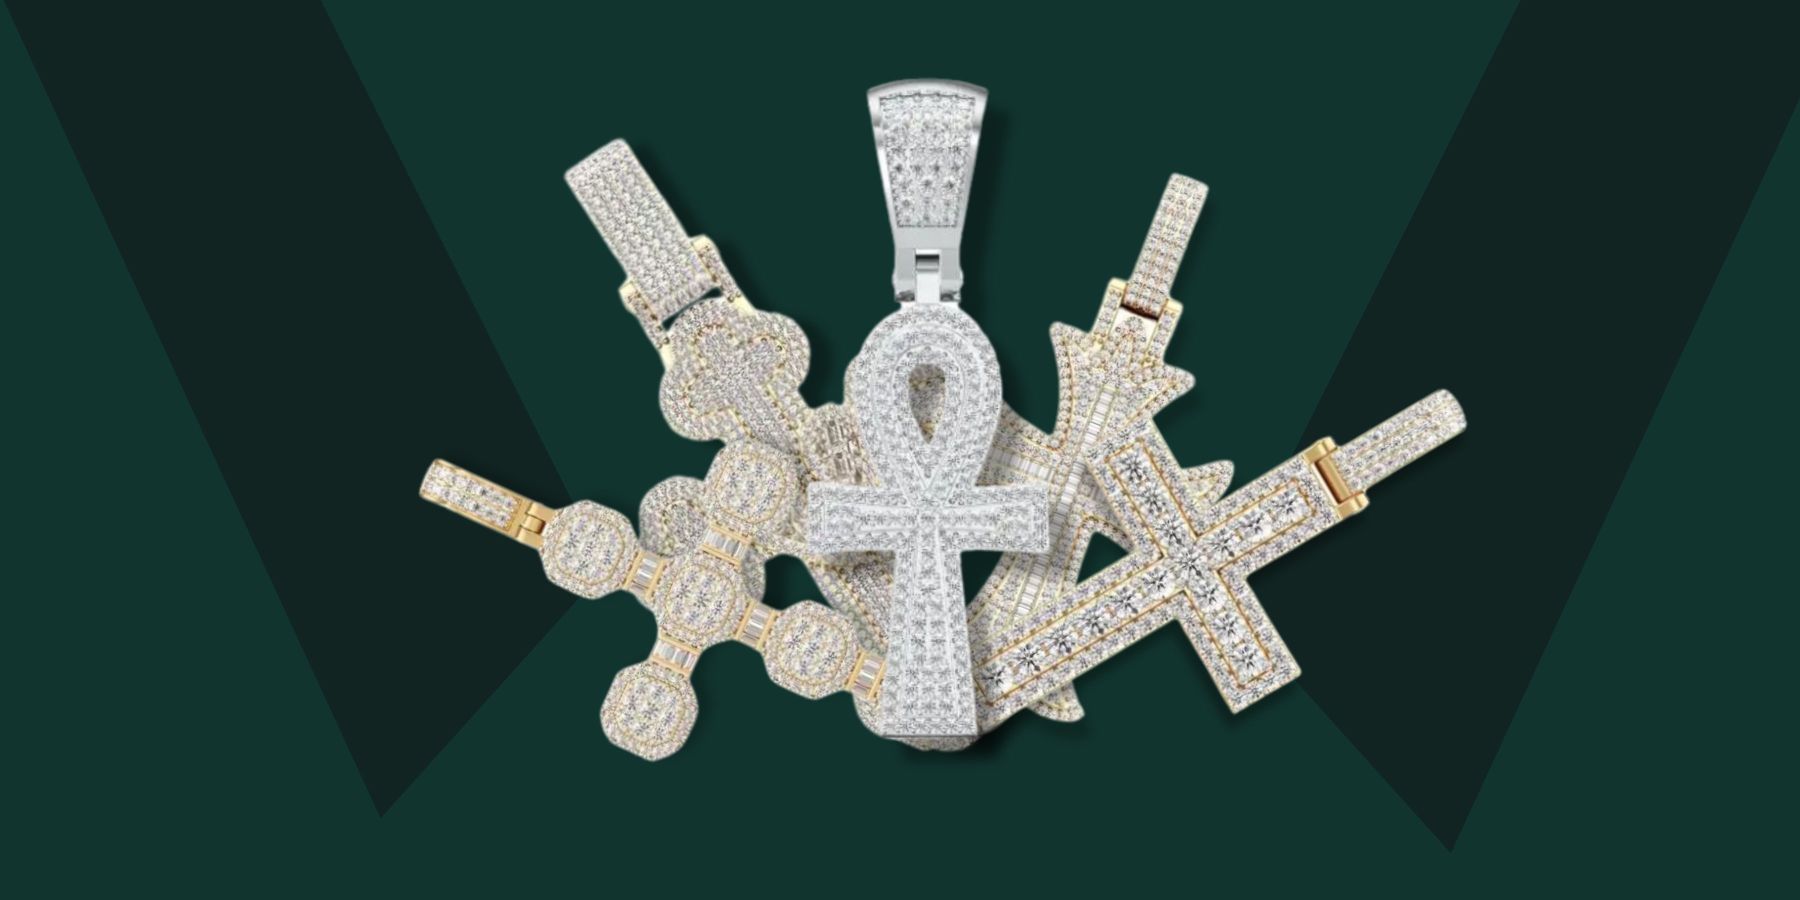 Crosses: Symbolism, Style, and Substance in Jewelry